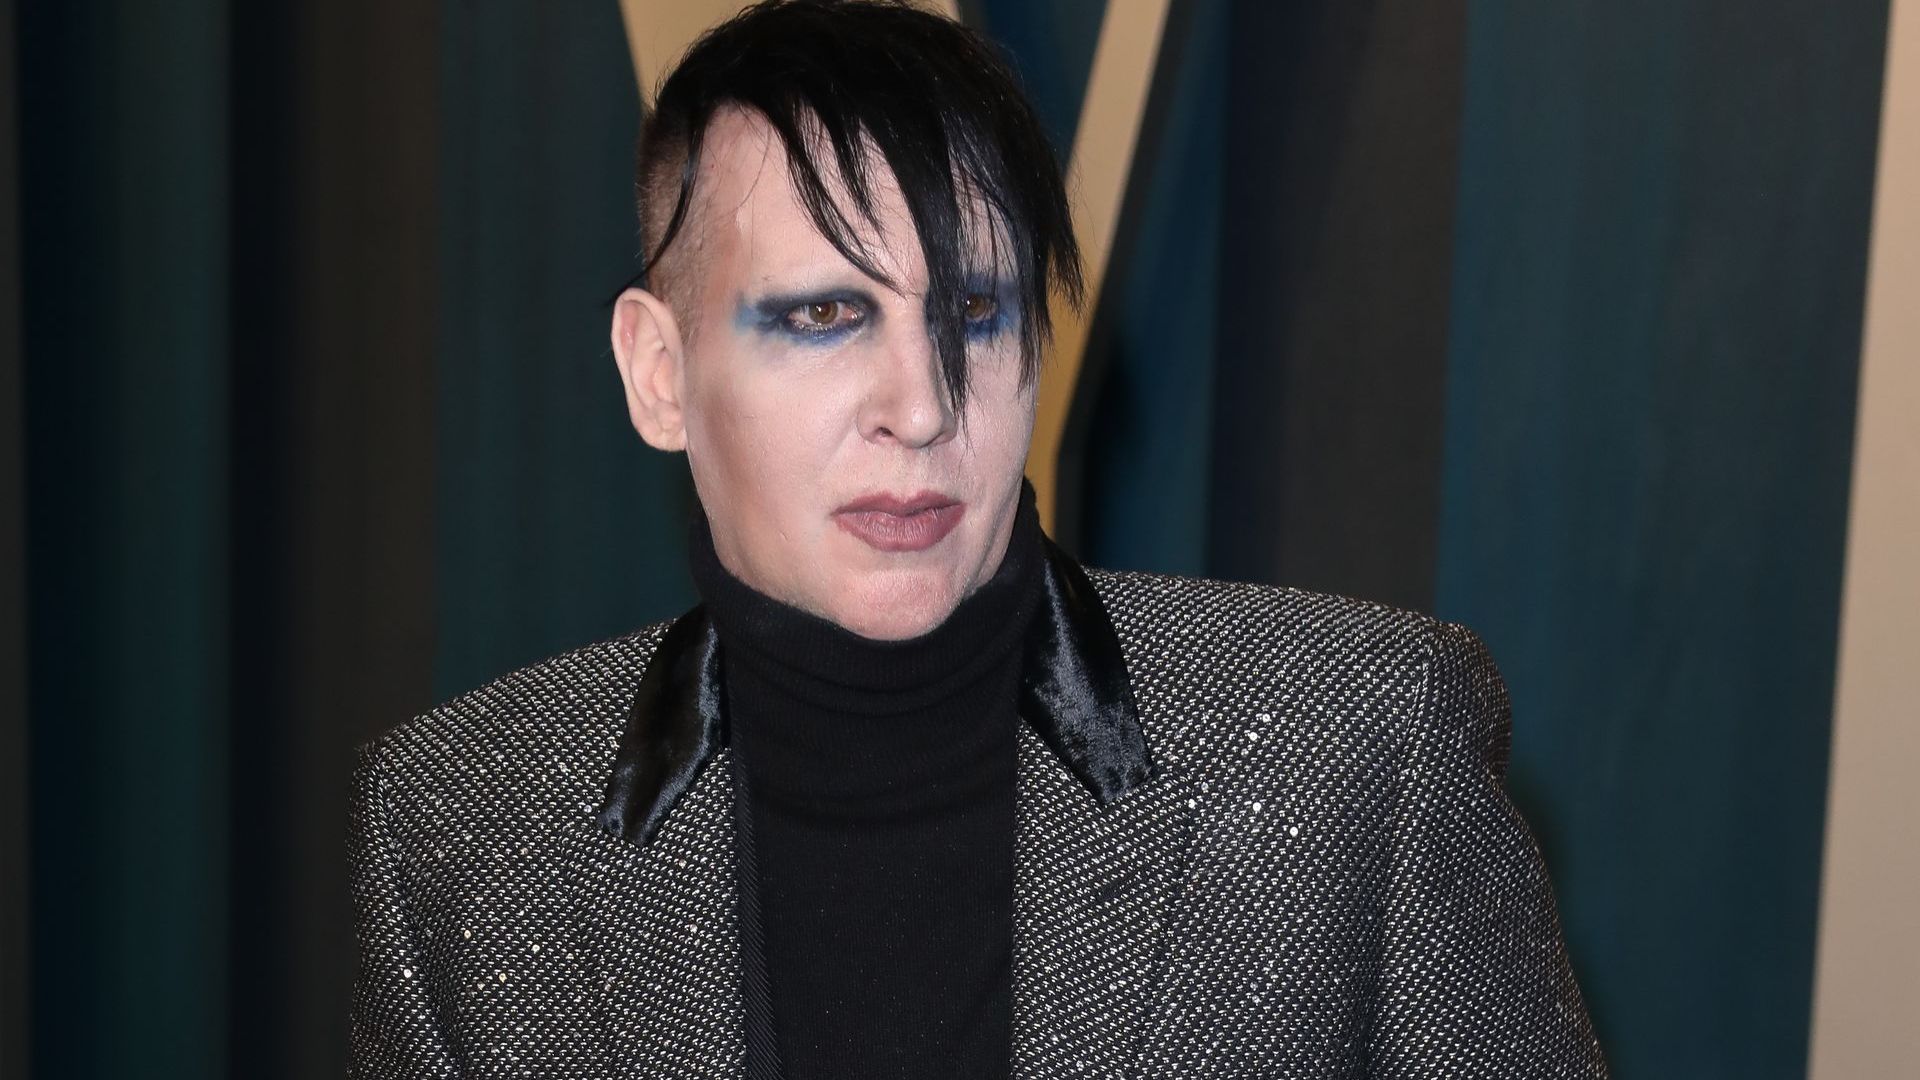 Marilyn Manson Abuse Allegations: A Monster Hiding in Plain Sight